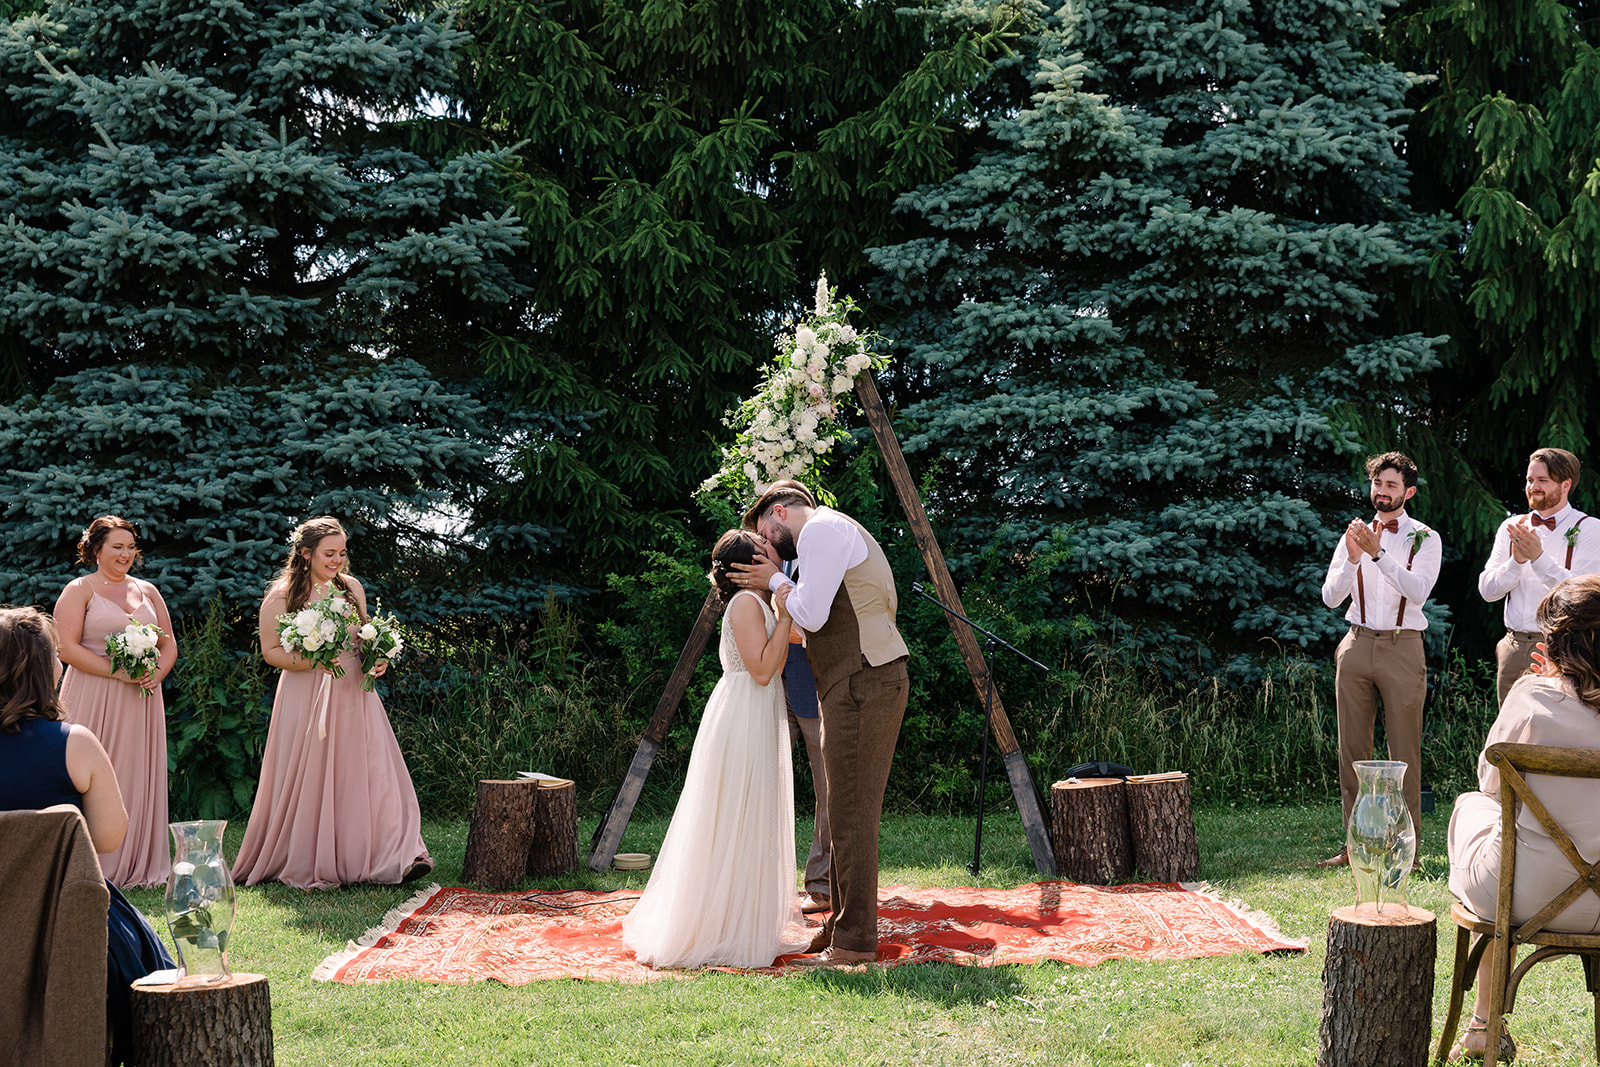 Bohemian style wedding in youngstown ohio